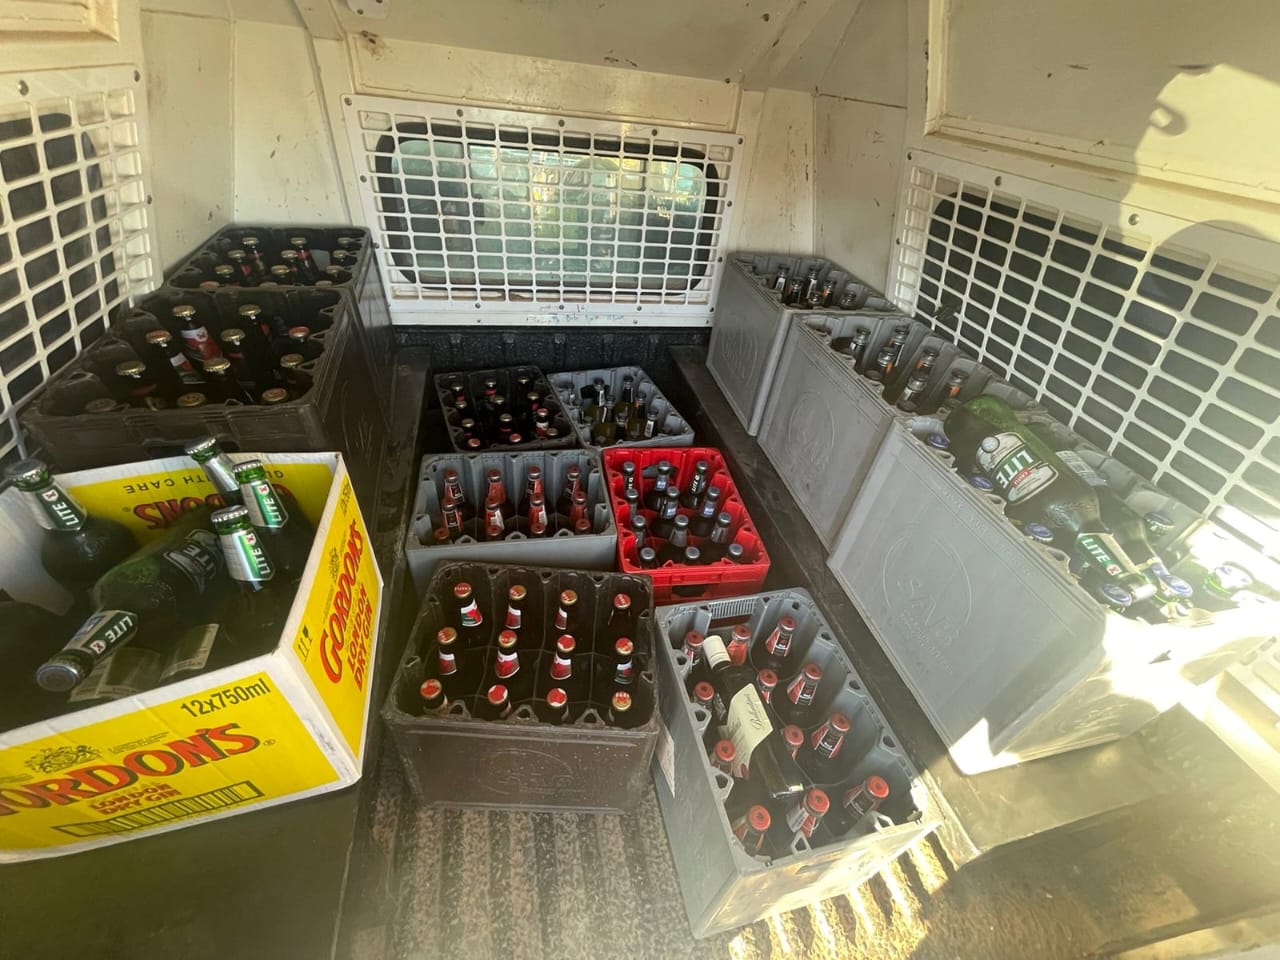 Garden route police clamps down on drug and liquor outlets during Operation Shanela